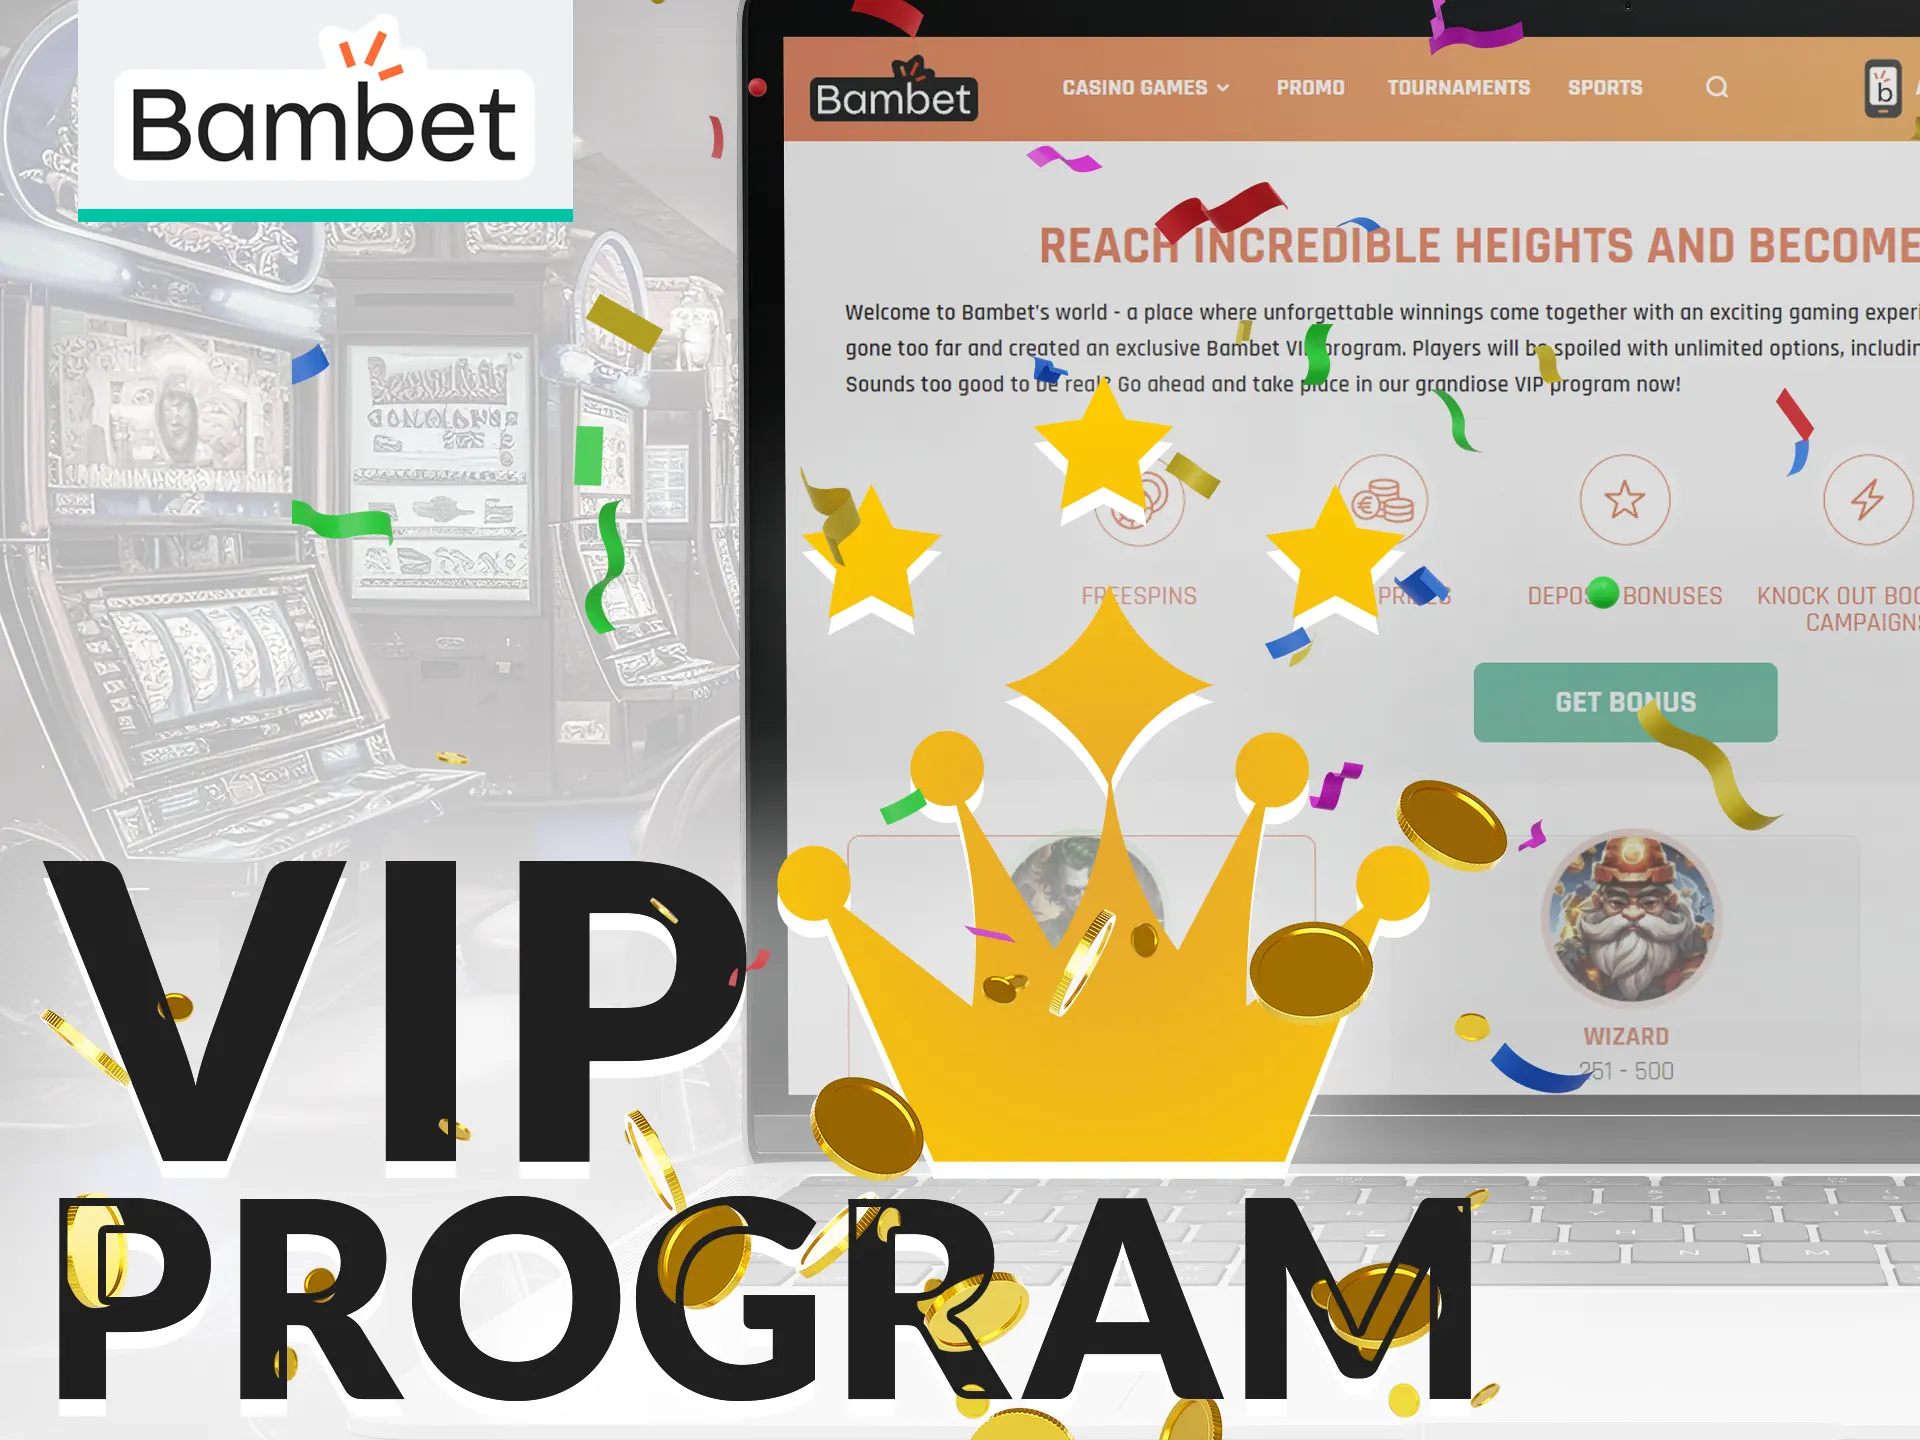 Join VIP program at Bambet and get amazing bonuses.